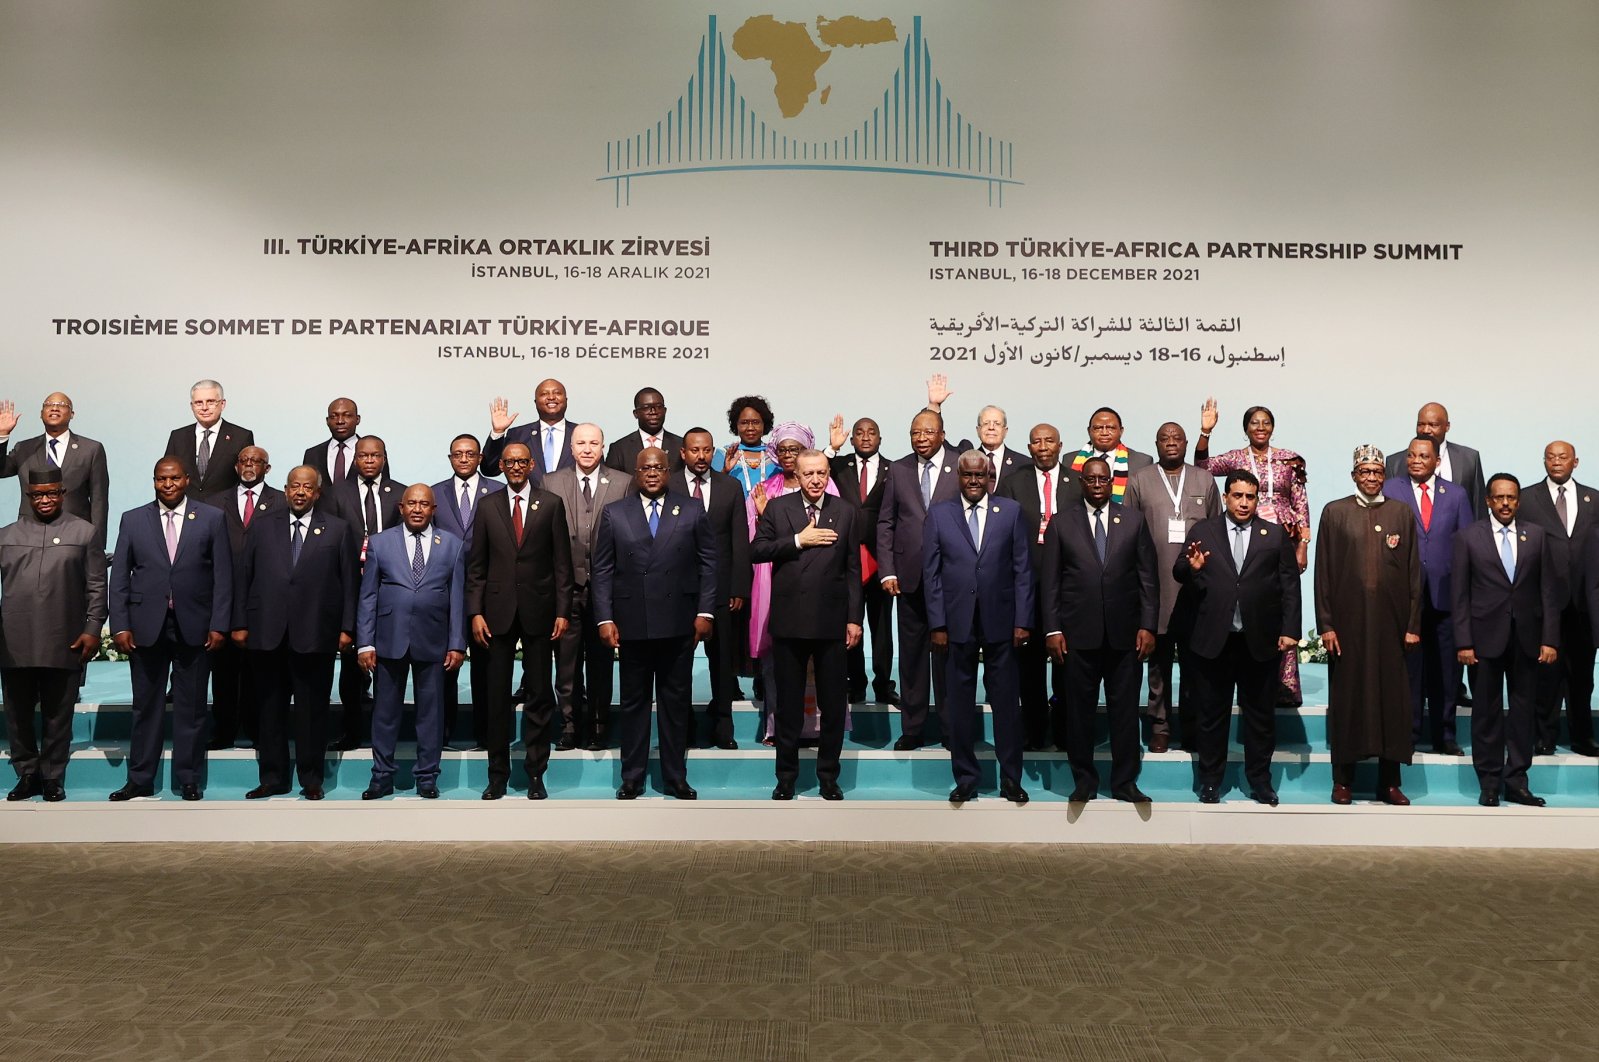 President Recep Tayyip Erdoğan (C) and leaders of the African nations pose for a family photo during the 3rd Turkey-Africa Partnership Summit in Istanbul, Turkey, Dec. 18, 2021. (AA Photo)